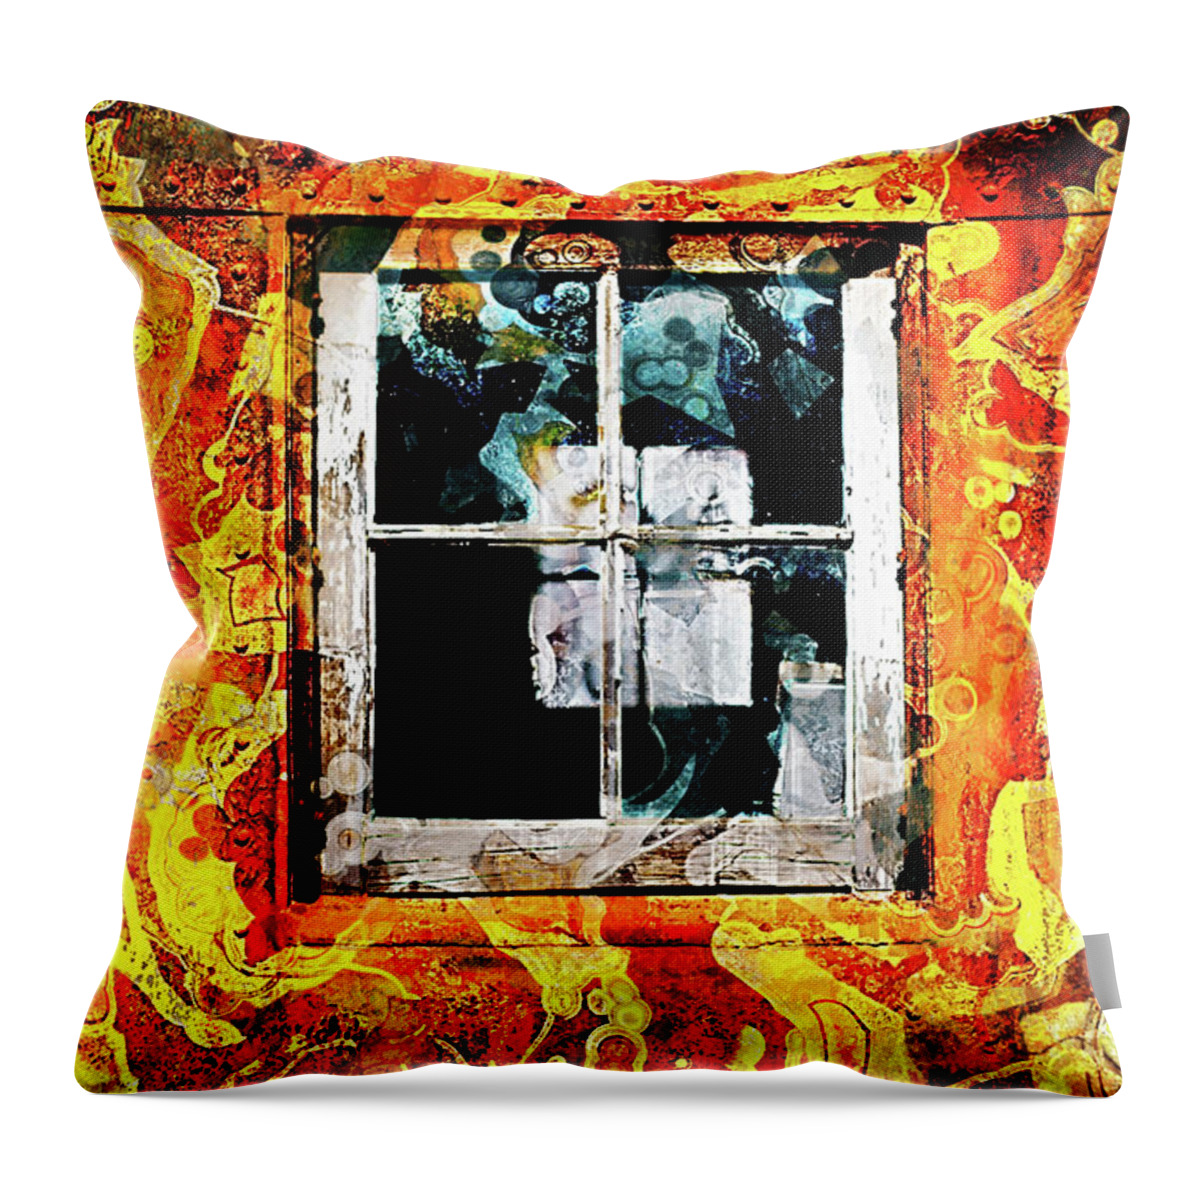 Grunge Throw Pillow featuring the photograph Vintage Grunge Window by Phil Perkins